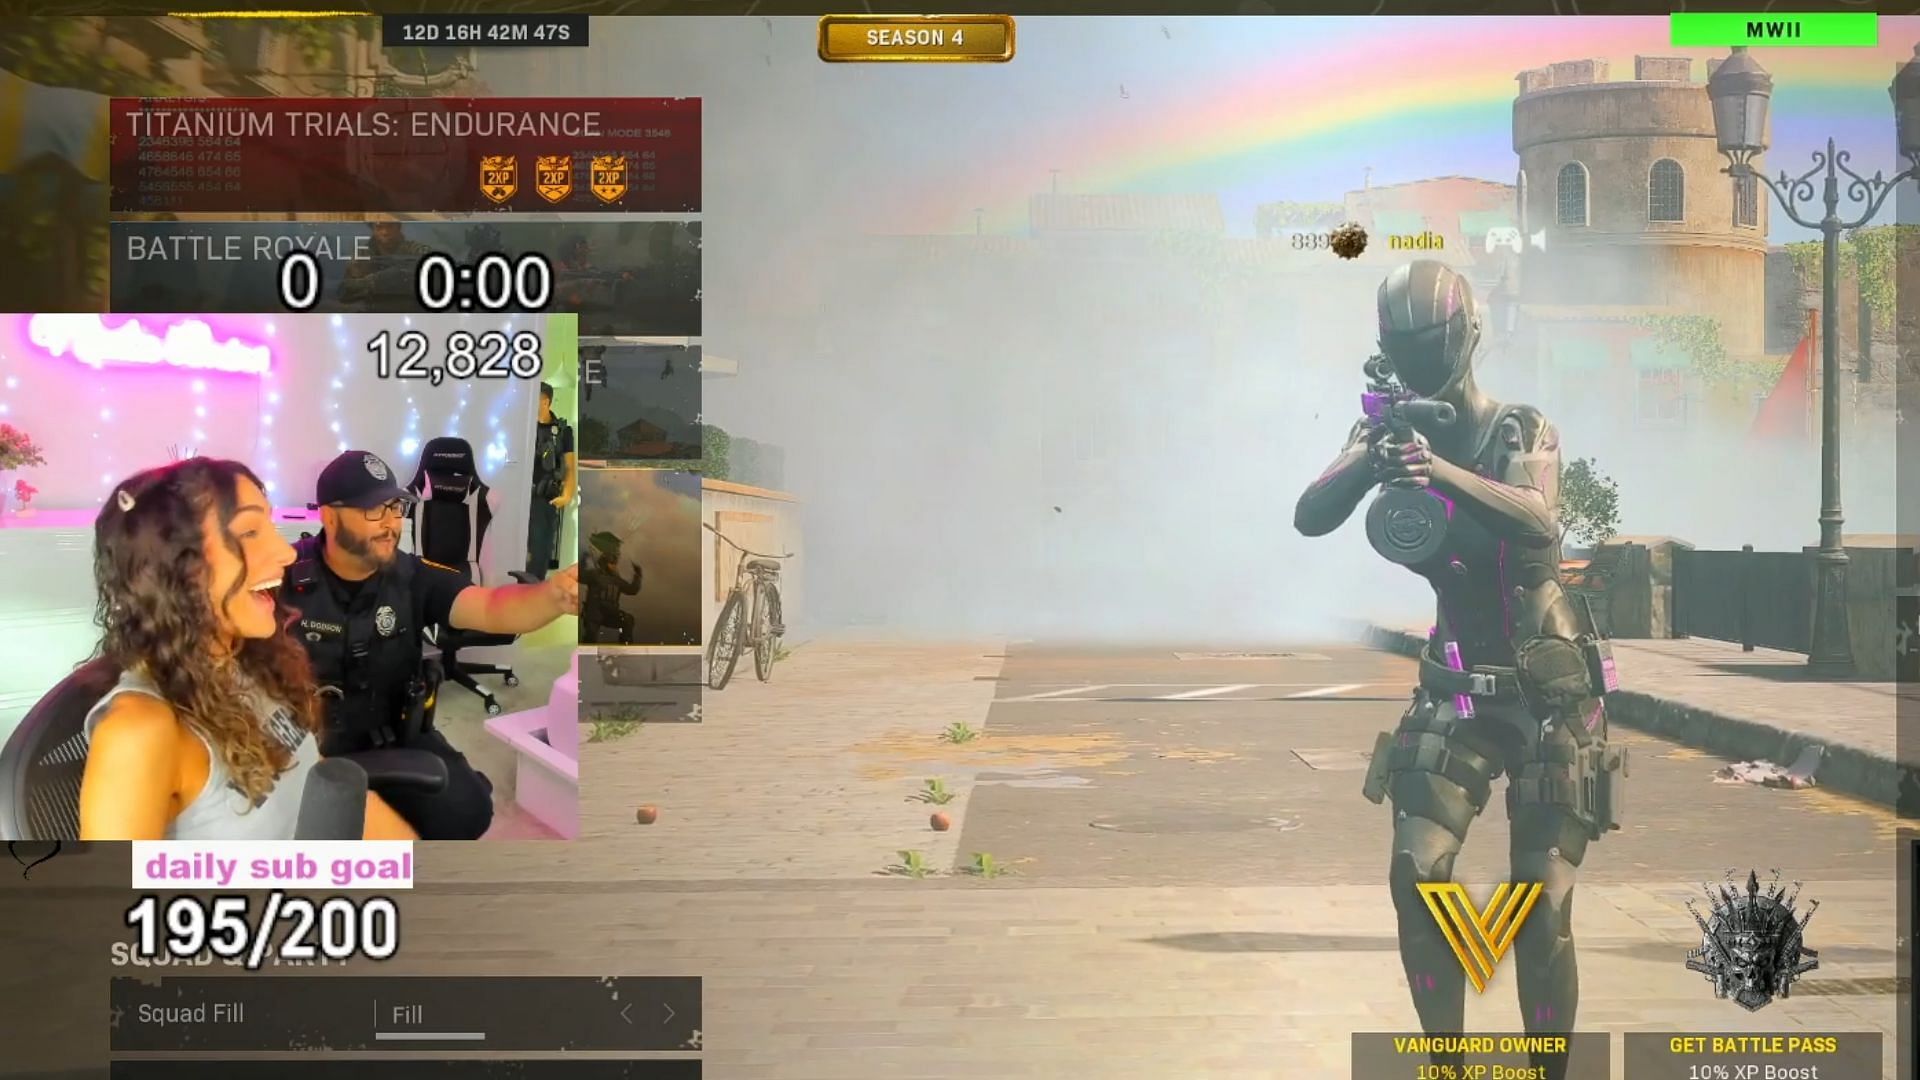 Swatting goes good as cool cop starts hype train in chat (Image via Nadia/Twitch)